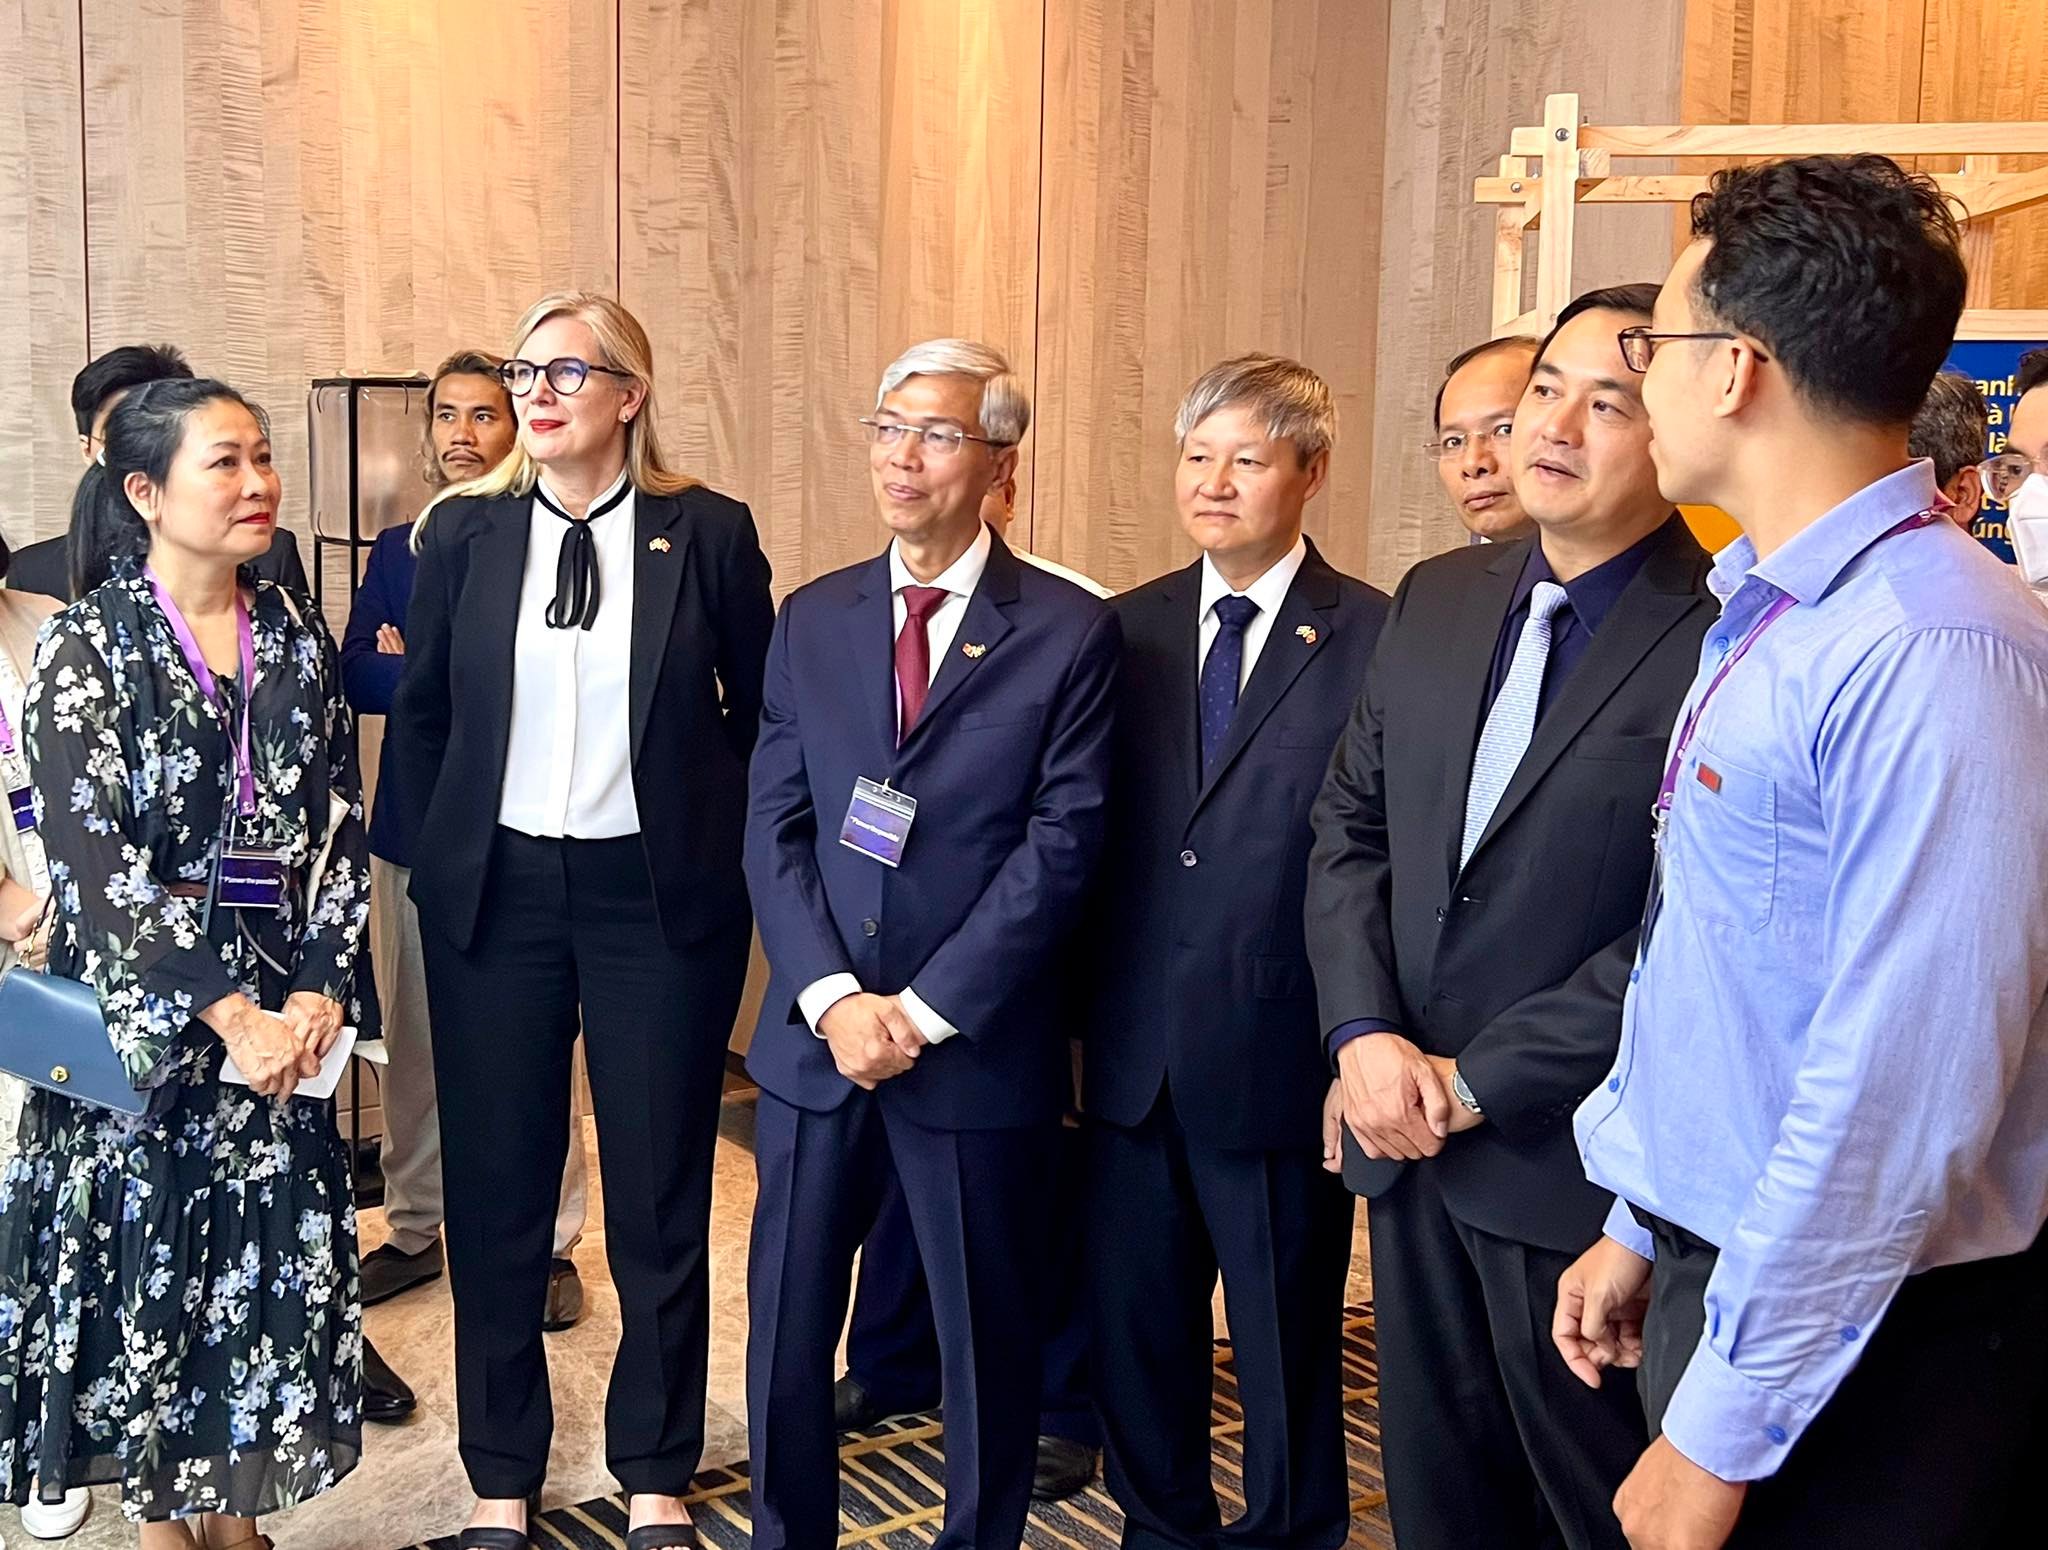 Swedish Ambassador to Vietnam Ann Måwe and vice-chairman of the Ho Chi Minh City People’s Committee Vo Van Hoan talk with a business at the ‘Pioneer the Possible’ Exhibition in Ho Chi Minh City, June 2, 2022. Photo: Duy Khang / Tuoi Tre